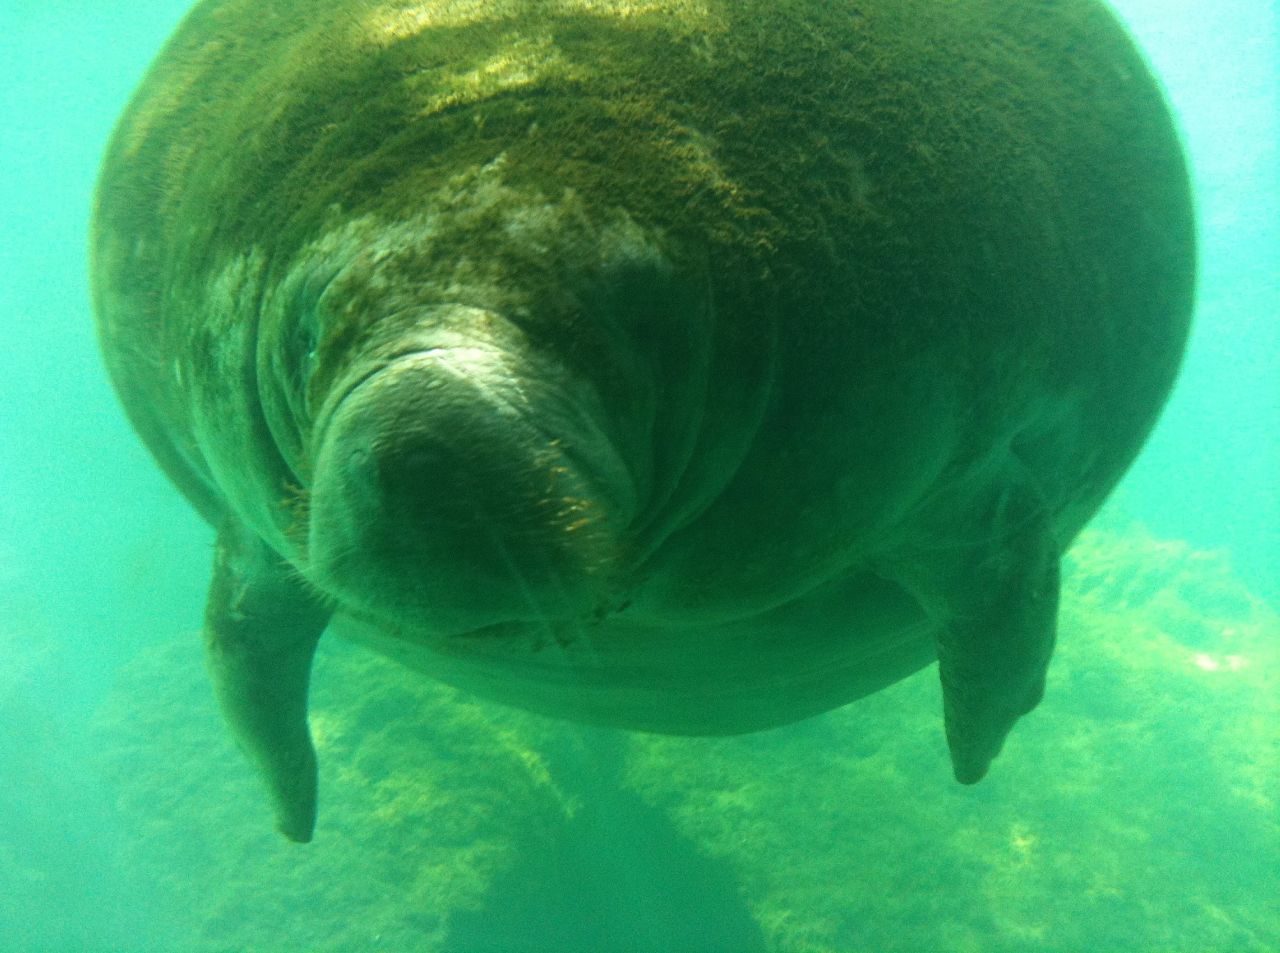 Jackpot! This is what it's all about at Homosassa Springs Wildlife State Park: a manatee spotting. These curious and endangered aquatic giants will sometimes swim right up to an underwater observation building at the state park.